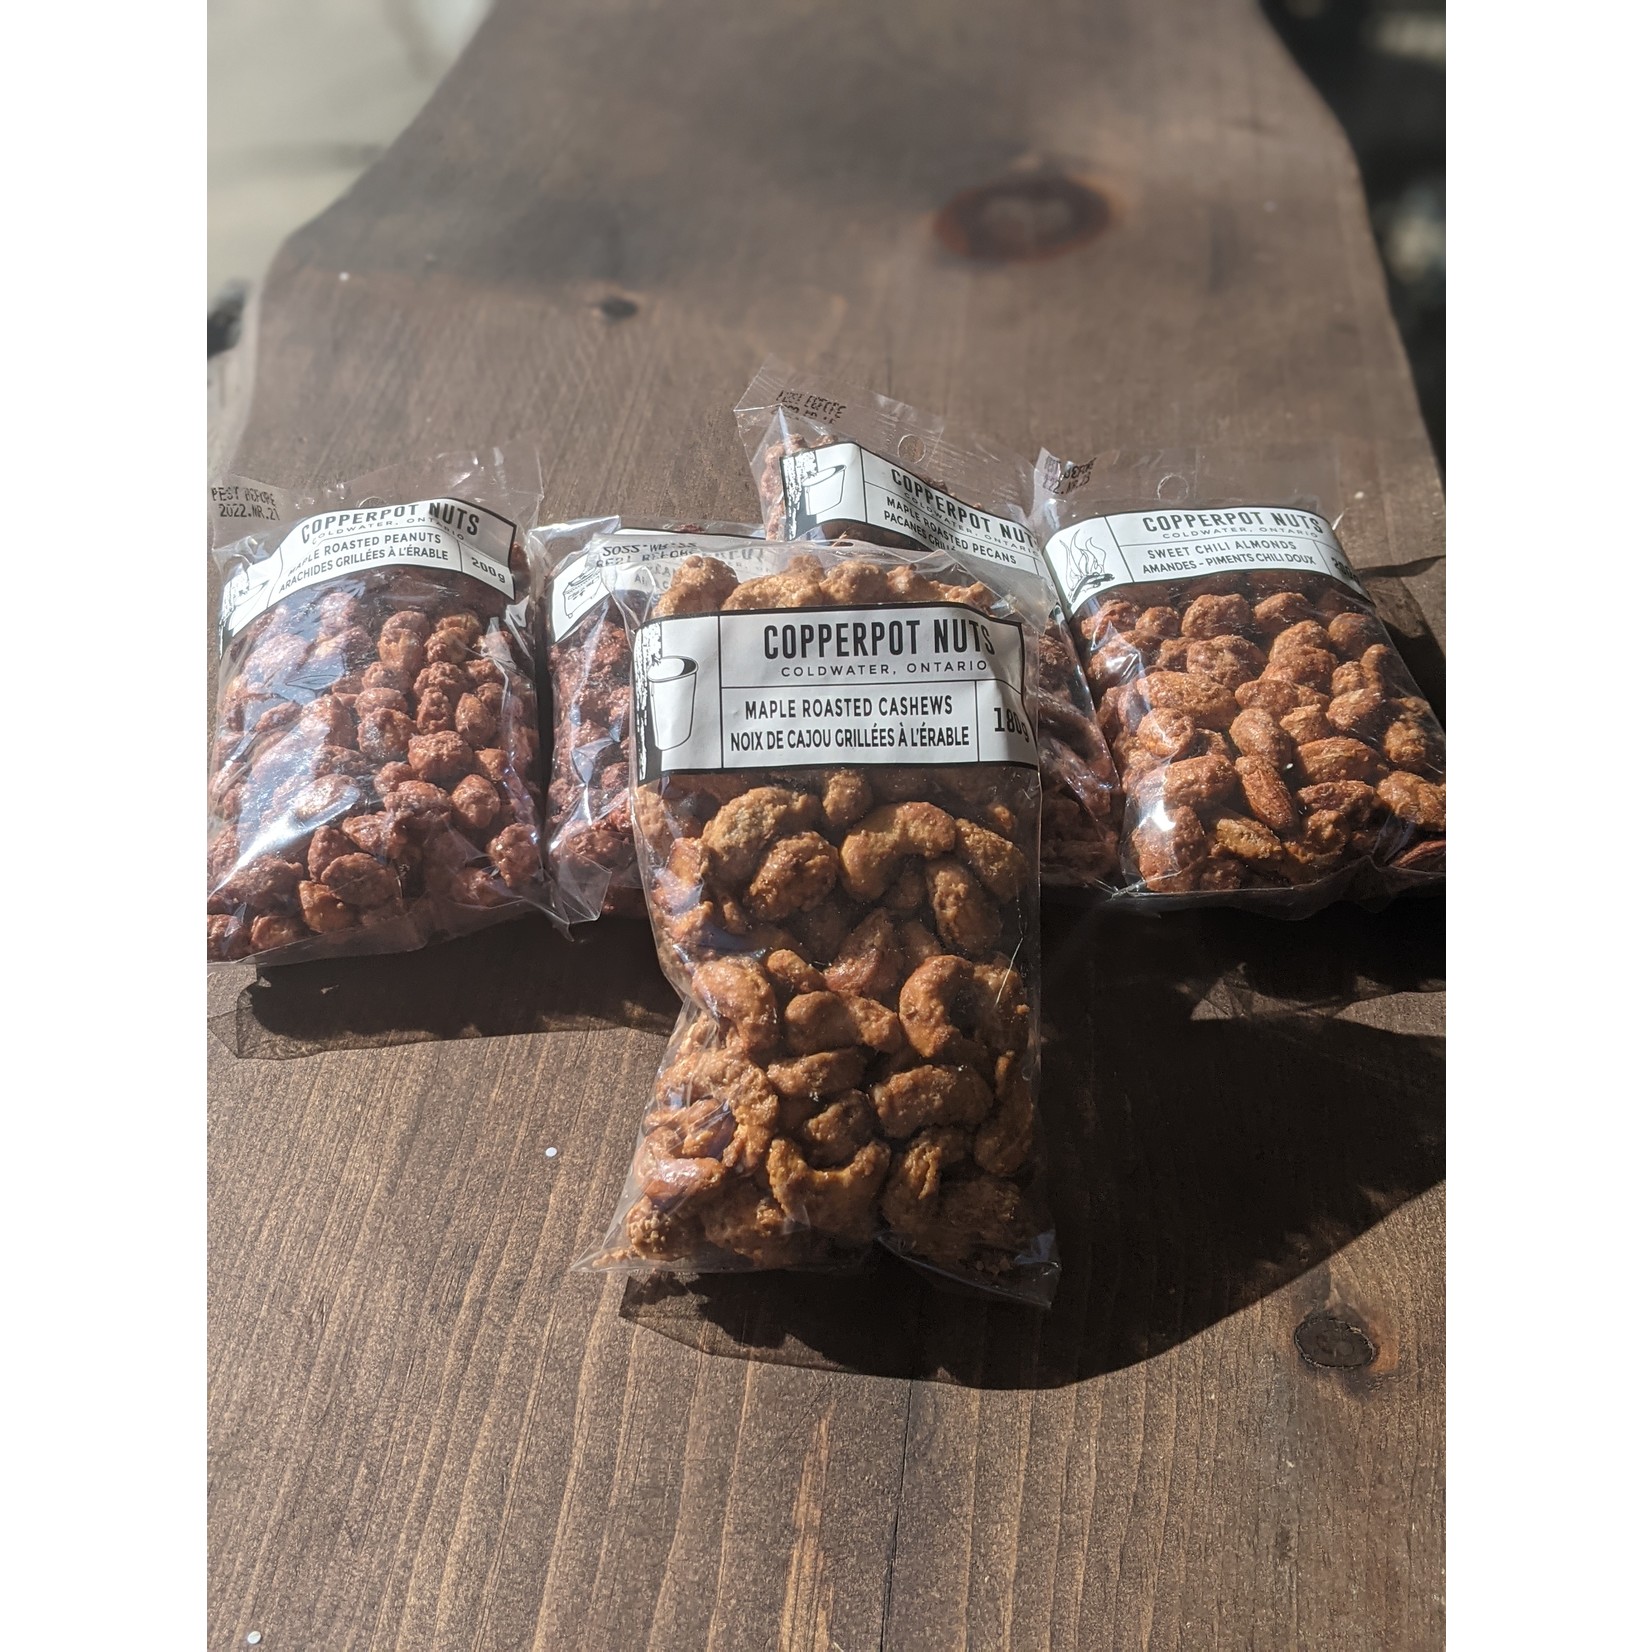 COPPERPOT NUTS COPPERPOT NUTS MAPLE ROASTED CASHEWS